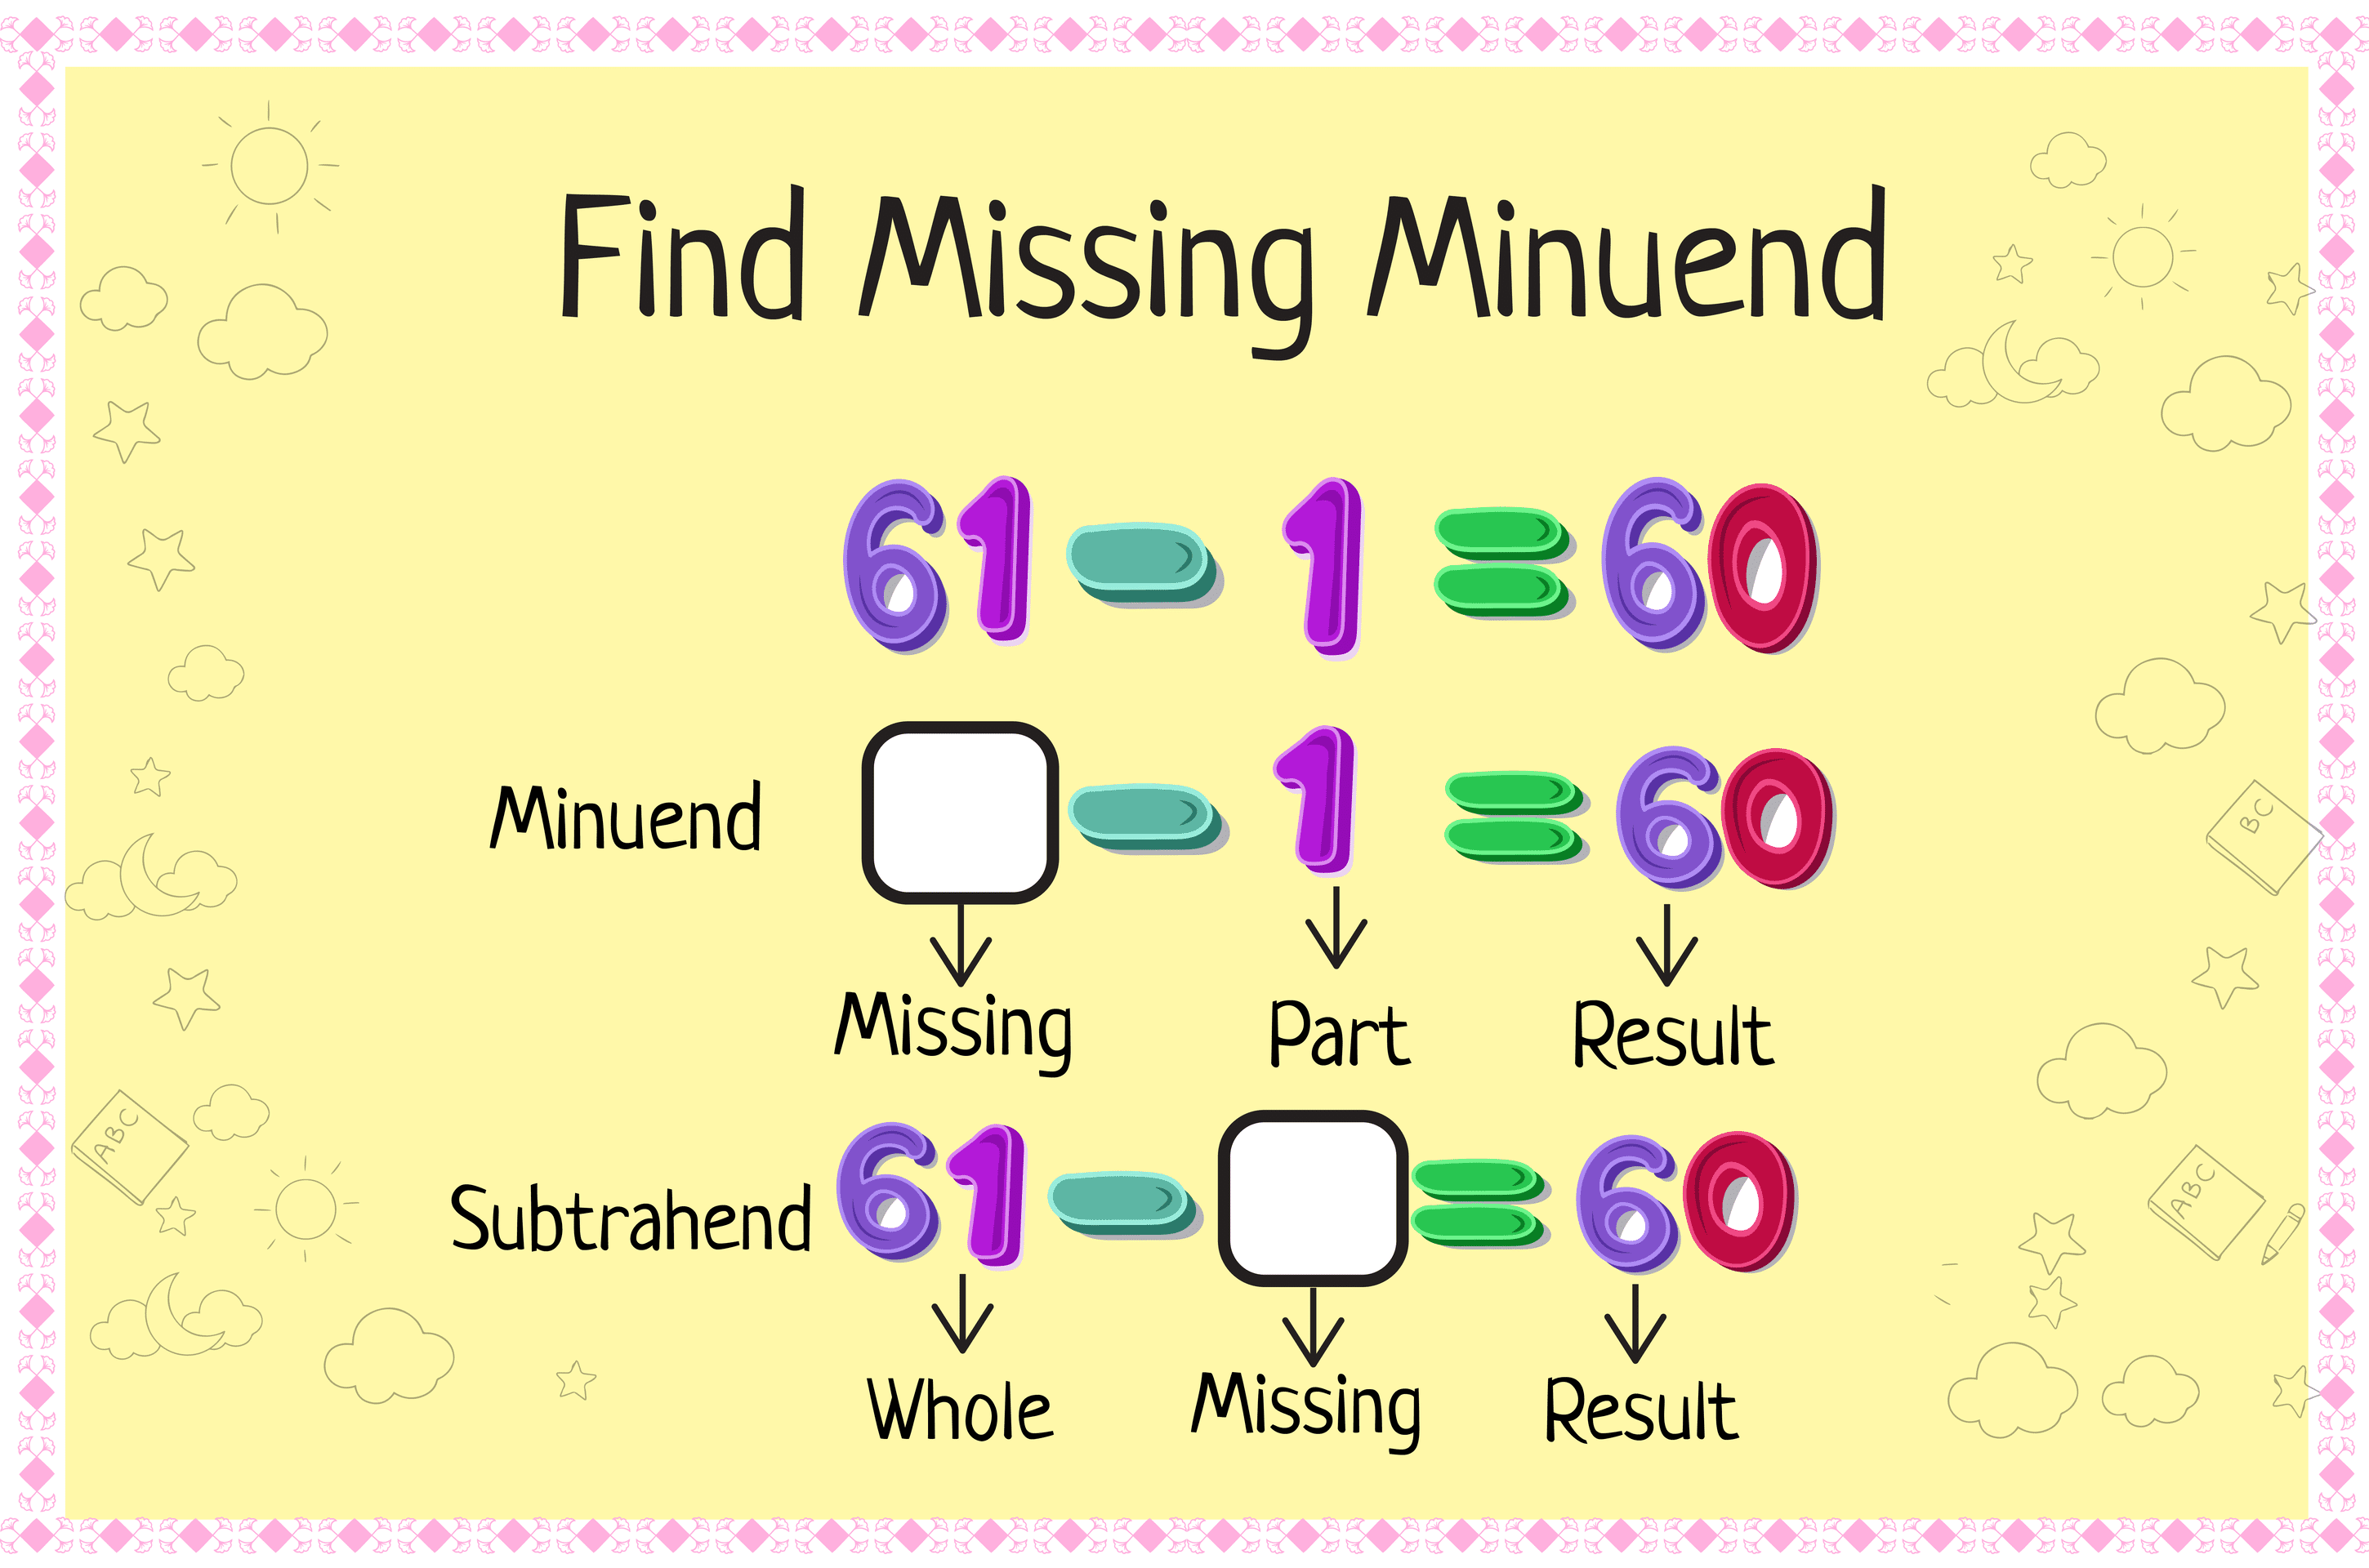 Explaining Missing Minuend and Subtrehand